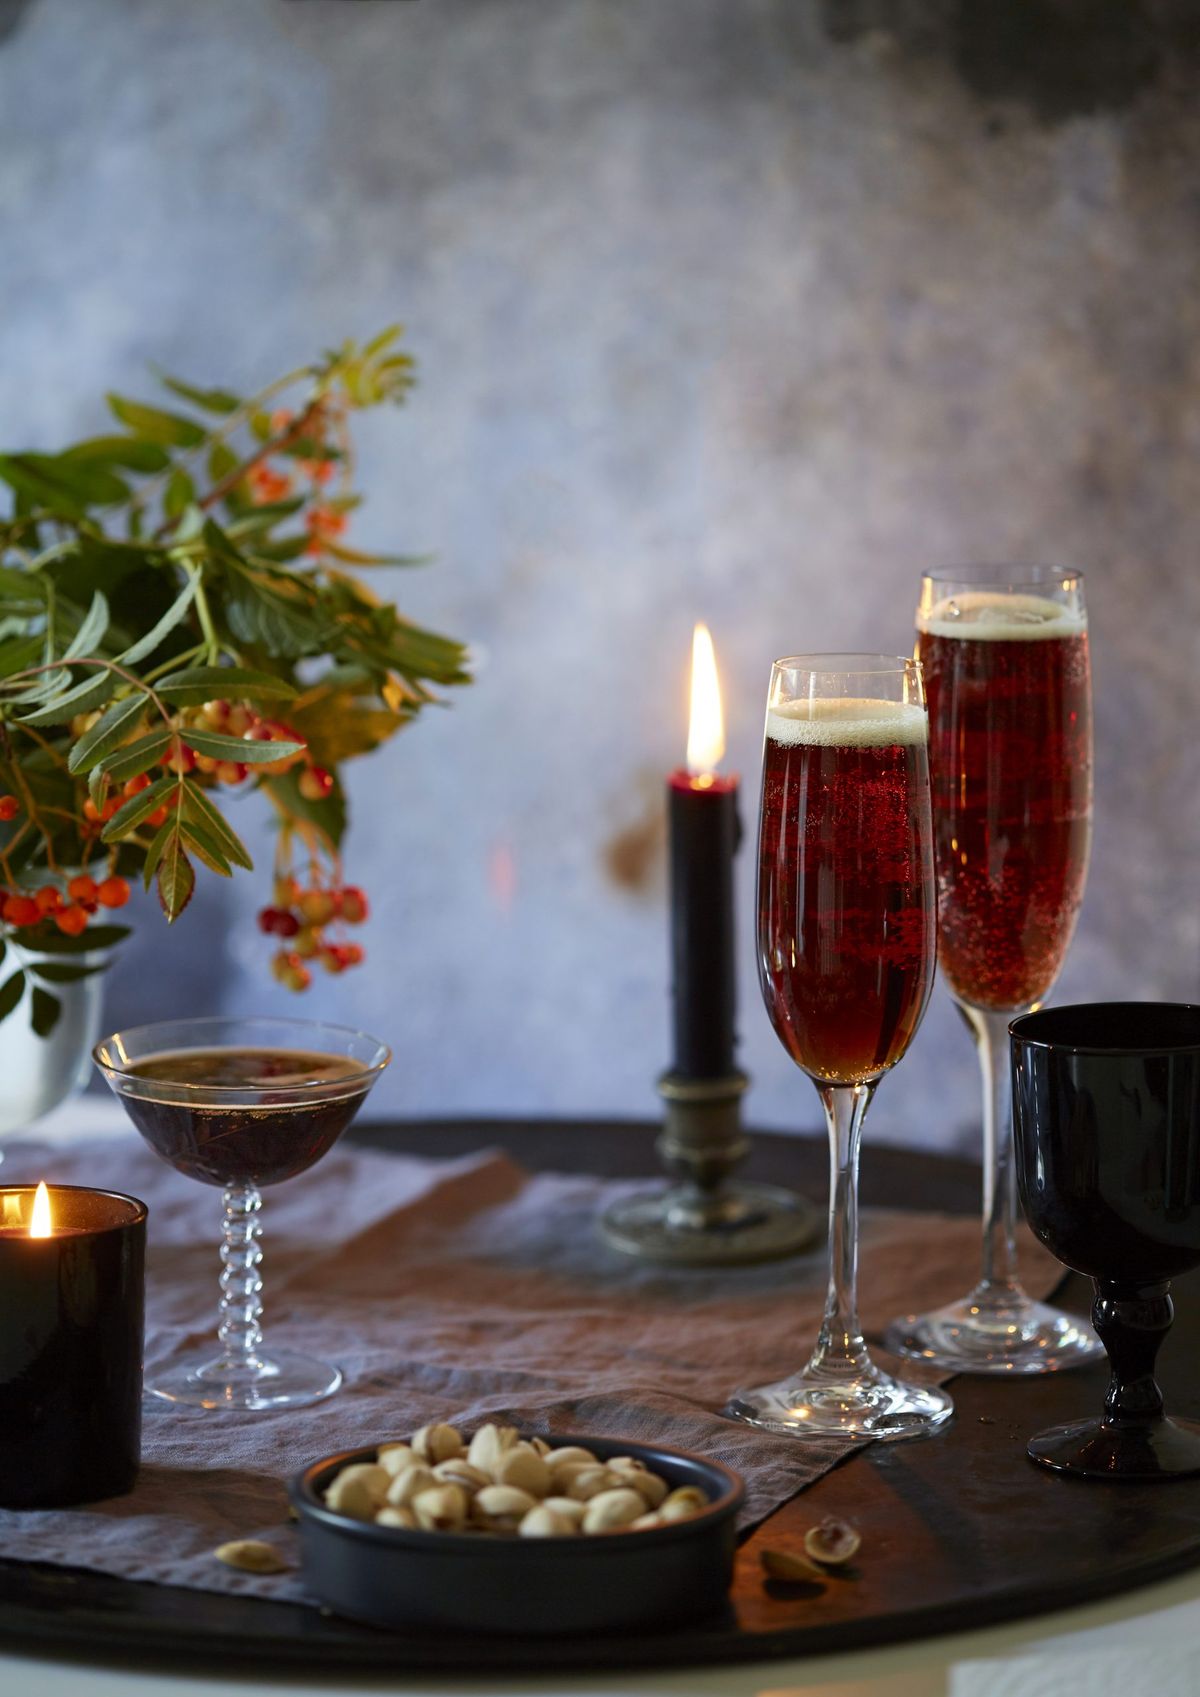 Try our striking black velvet cocktail that's both sparkling and rich this Christmas